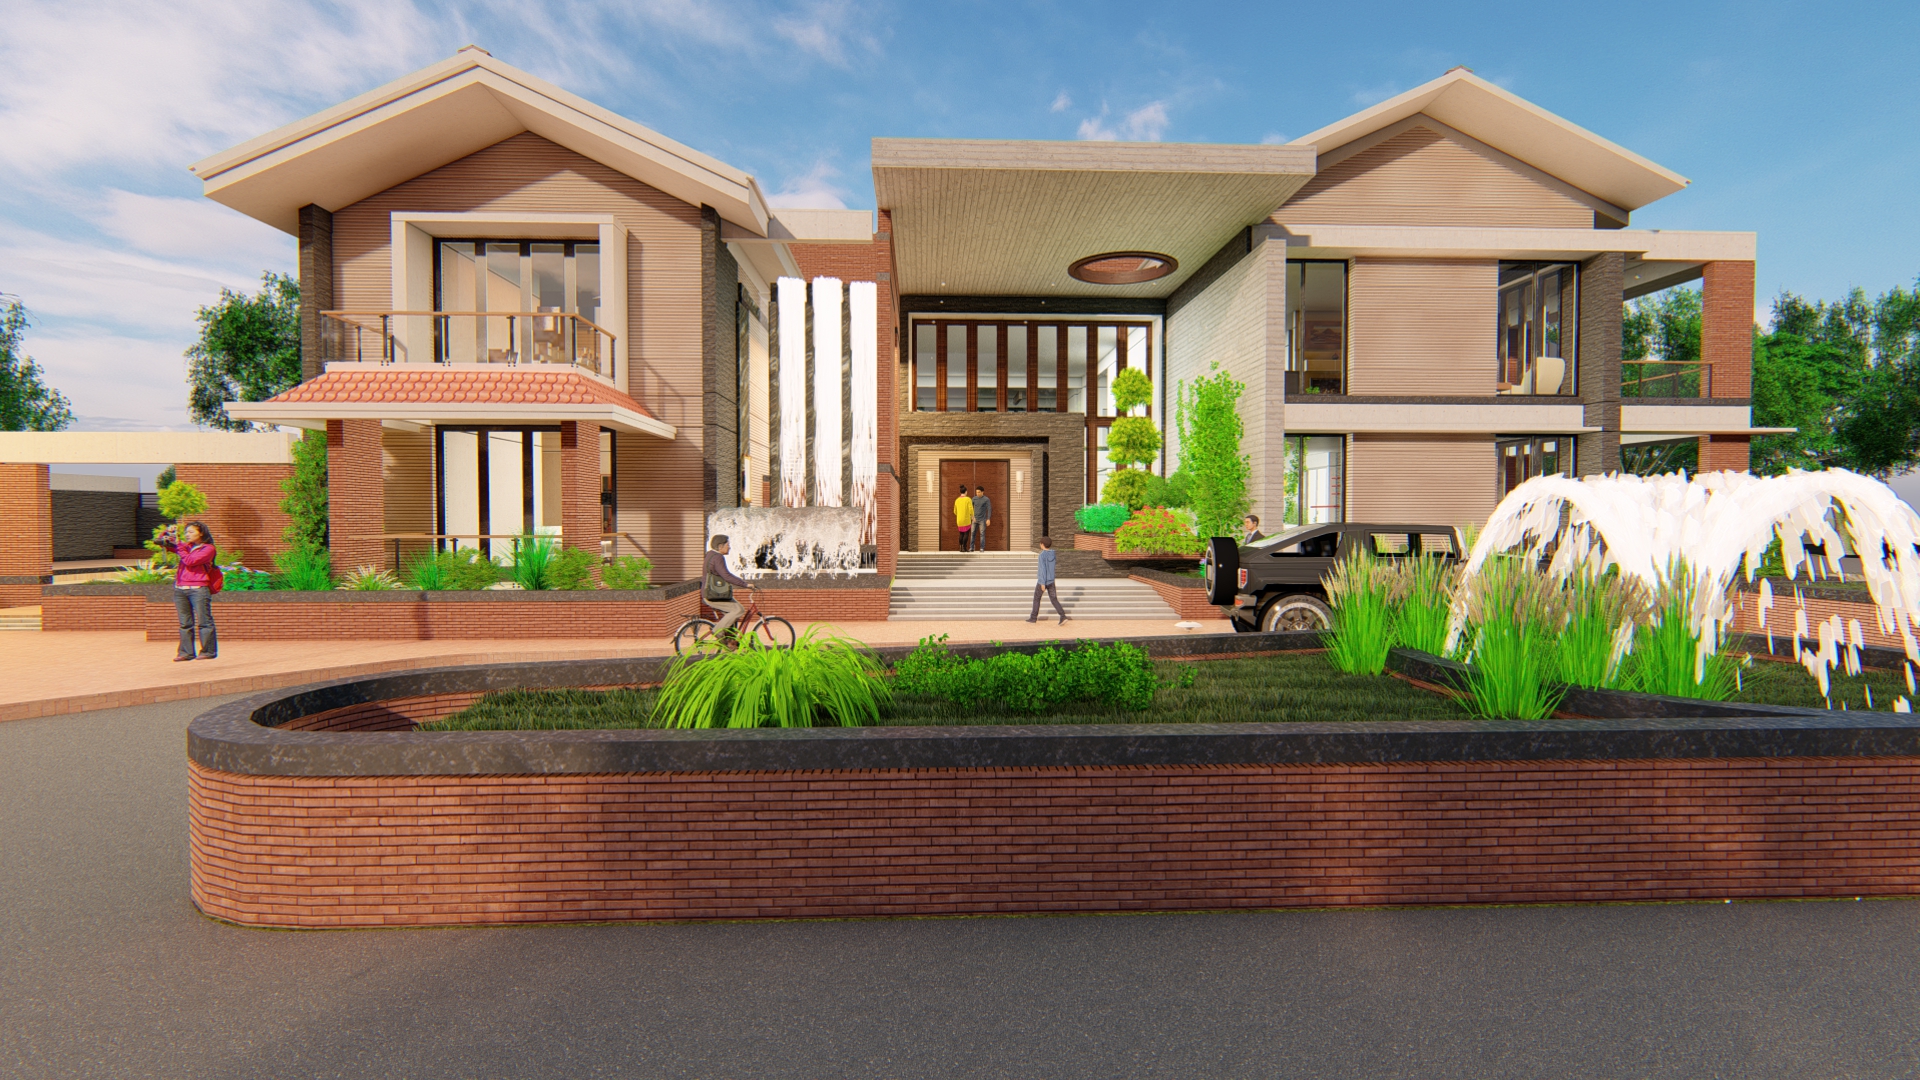 MD RESIDENCE in 3d max Other image